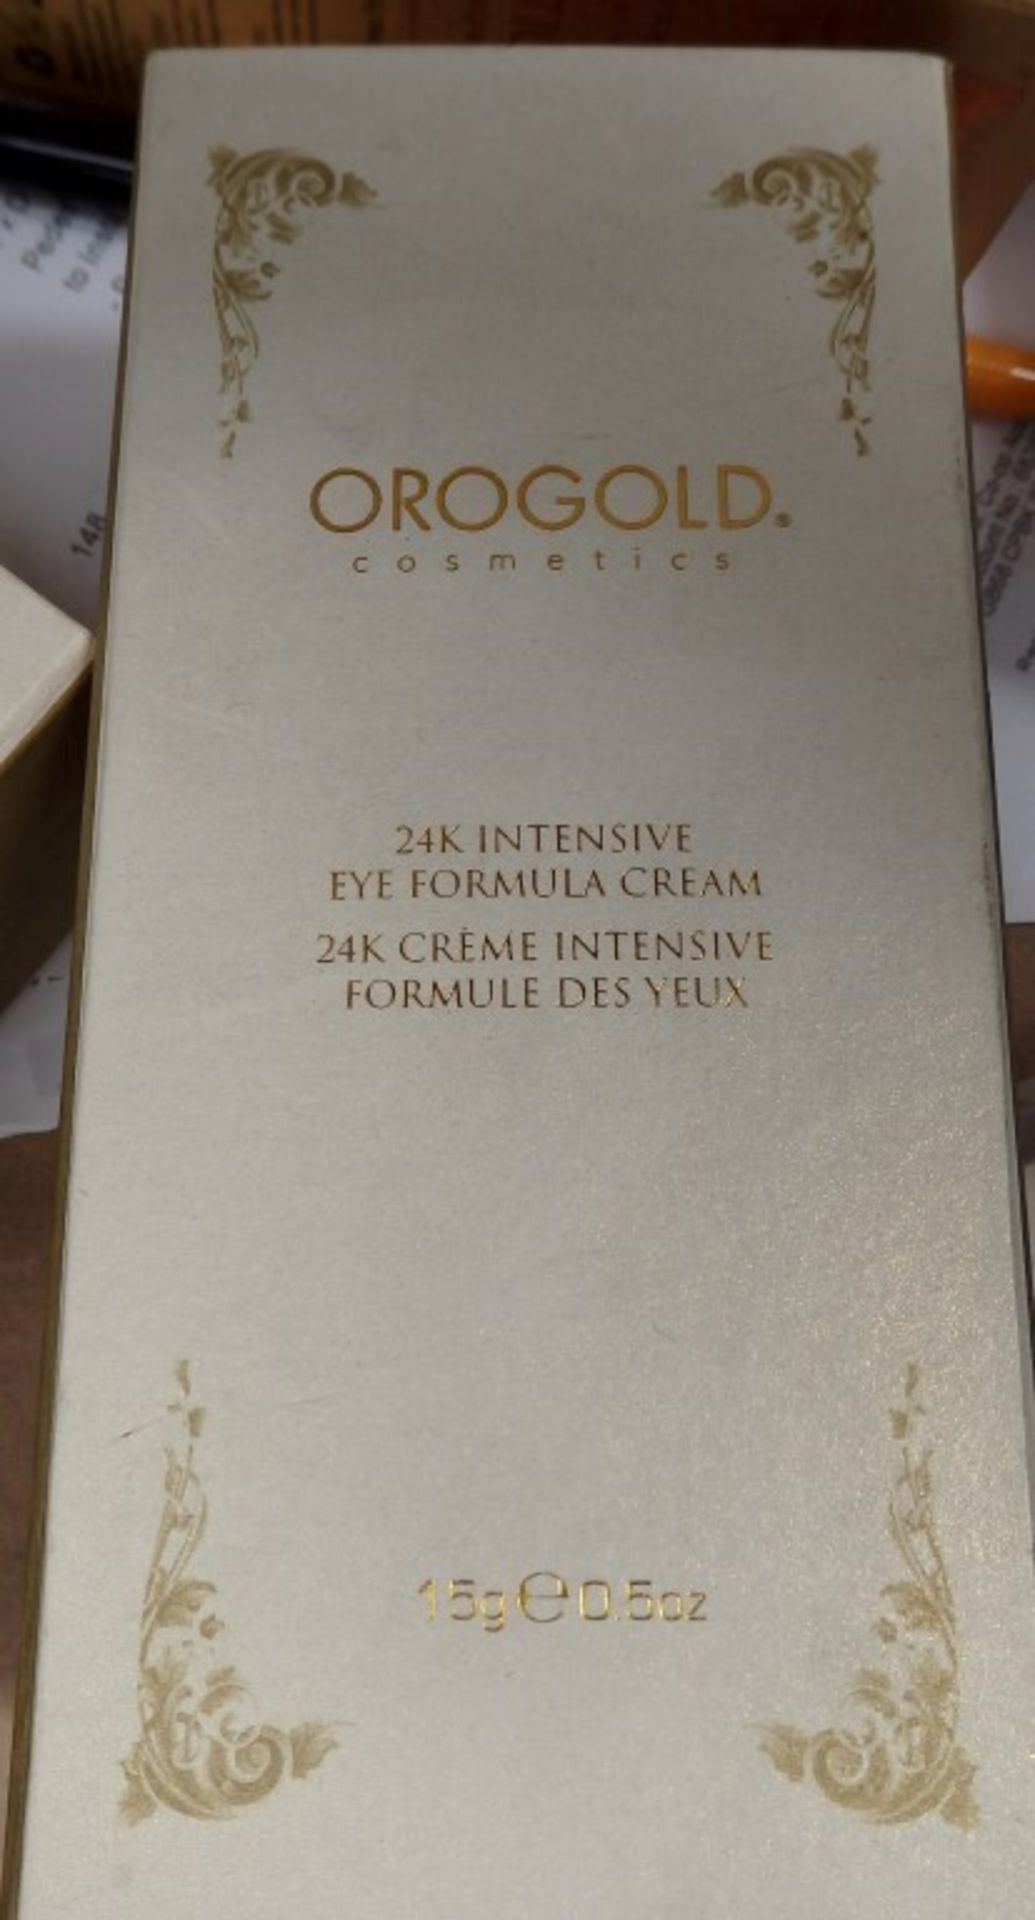 1 x Orogold 24K Intense Eye Formula Cream 15g - Reduces the Appearance of Dark Circles Around the - Image 2 of 4